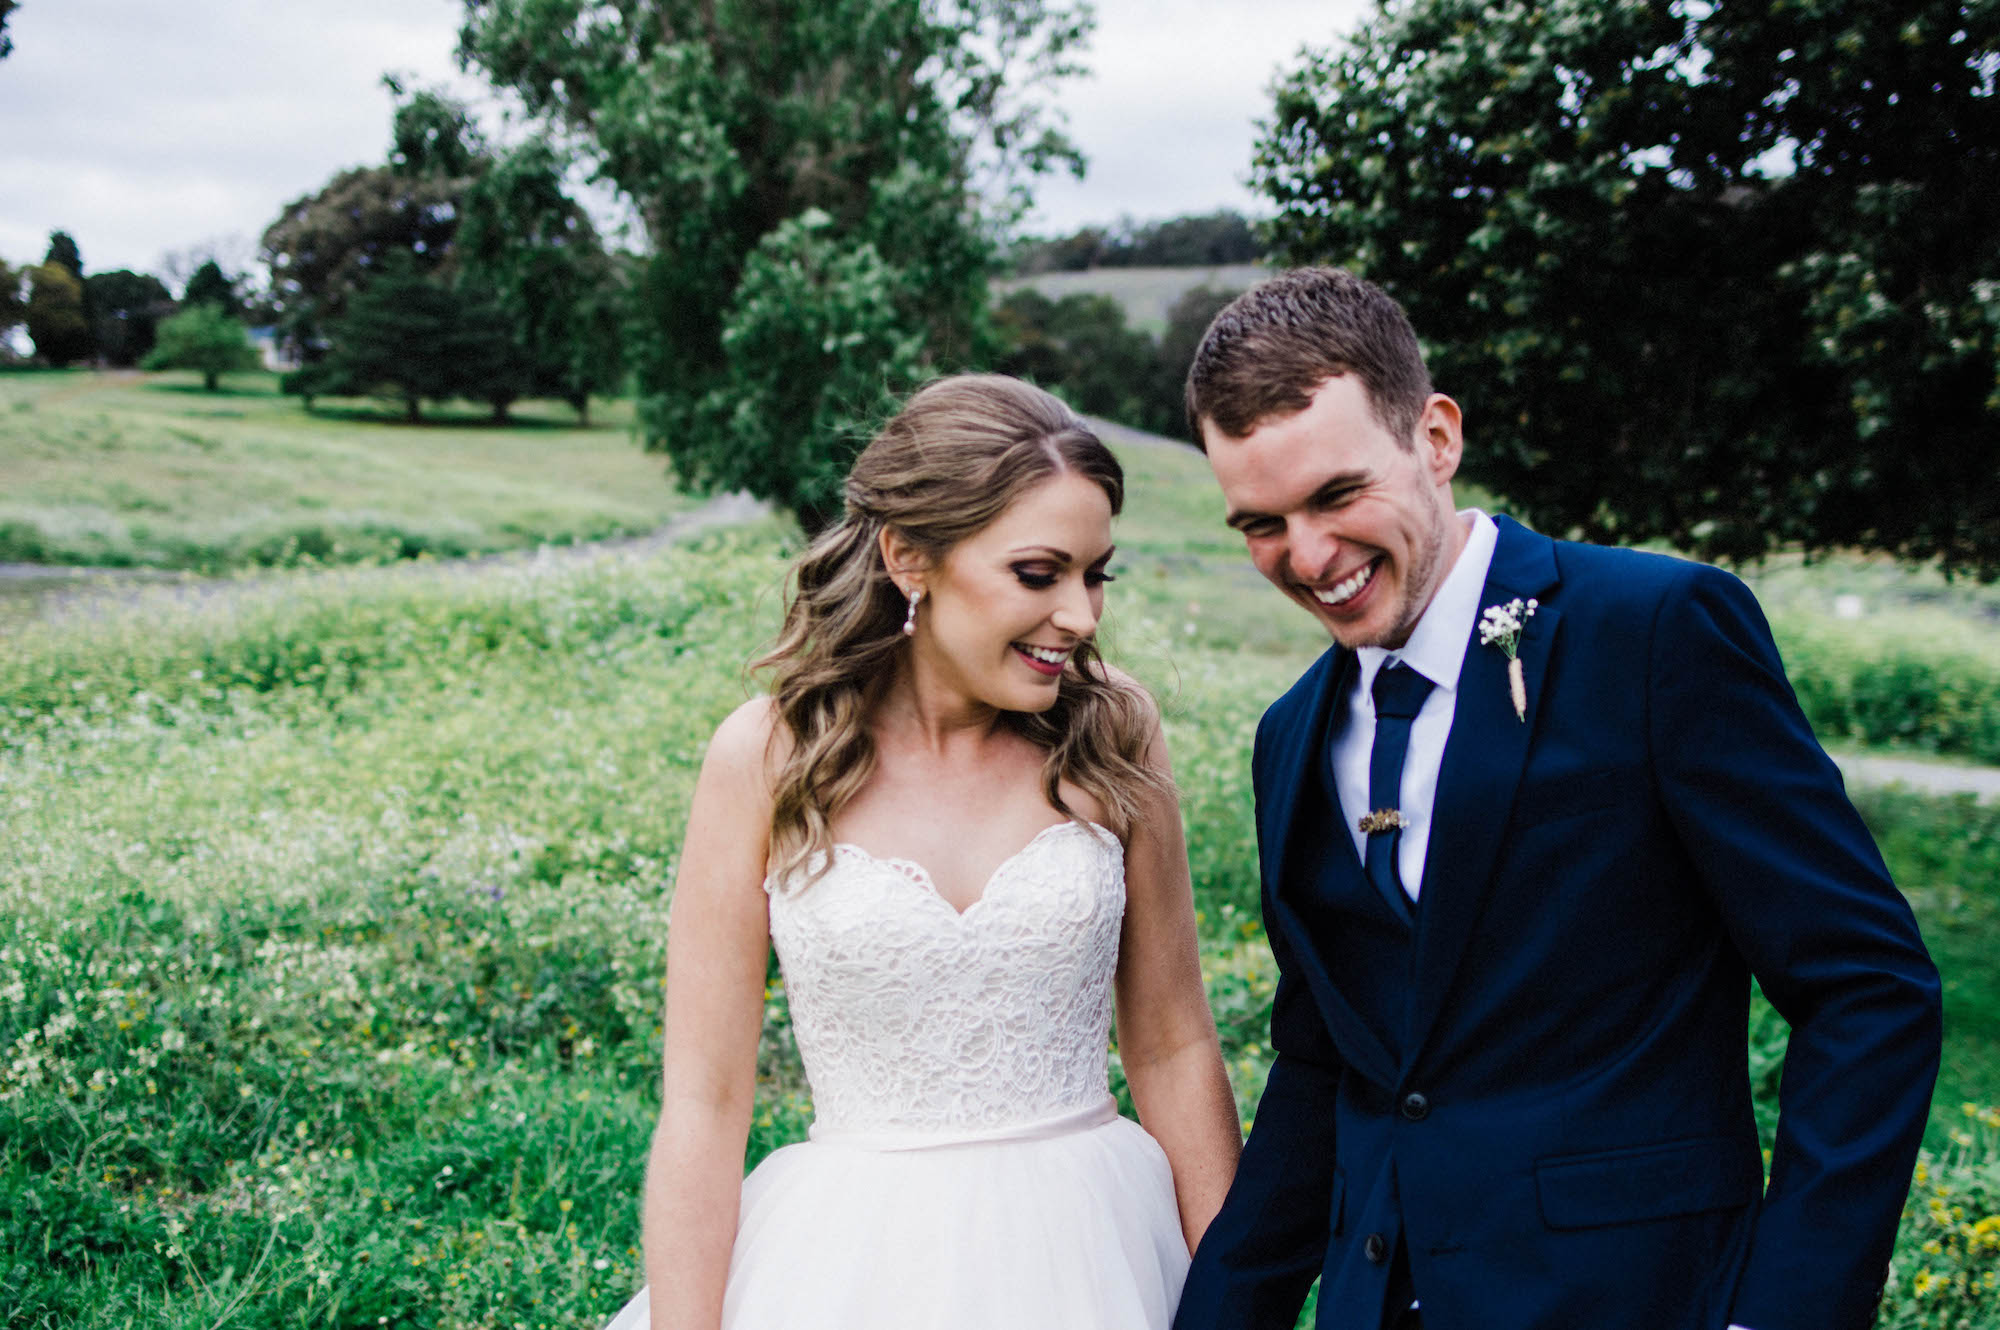 The bride & groom smile together during their wedding portraits in Byford, Australia.